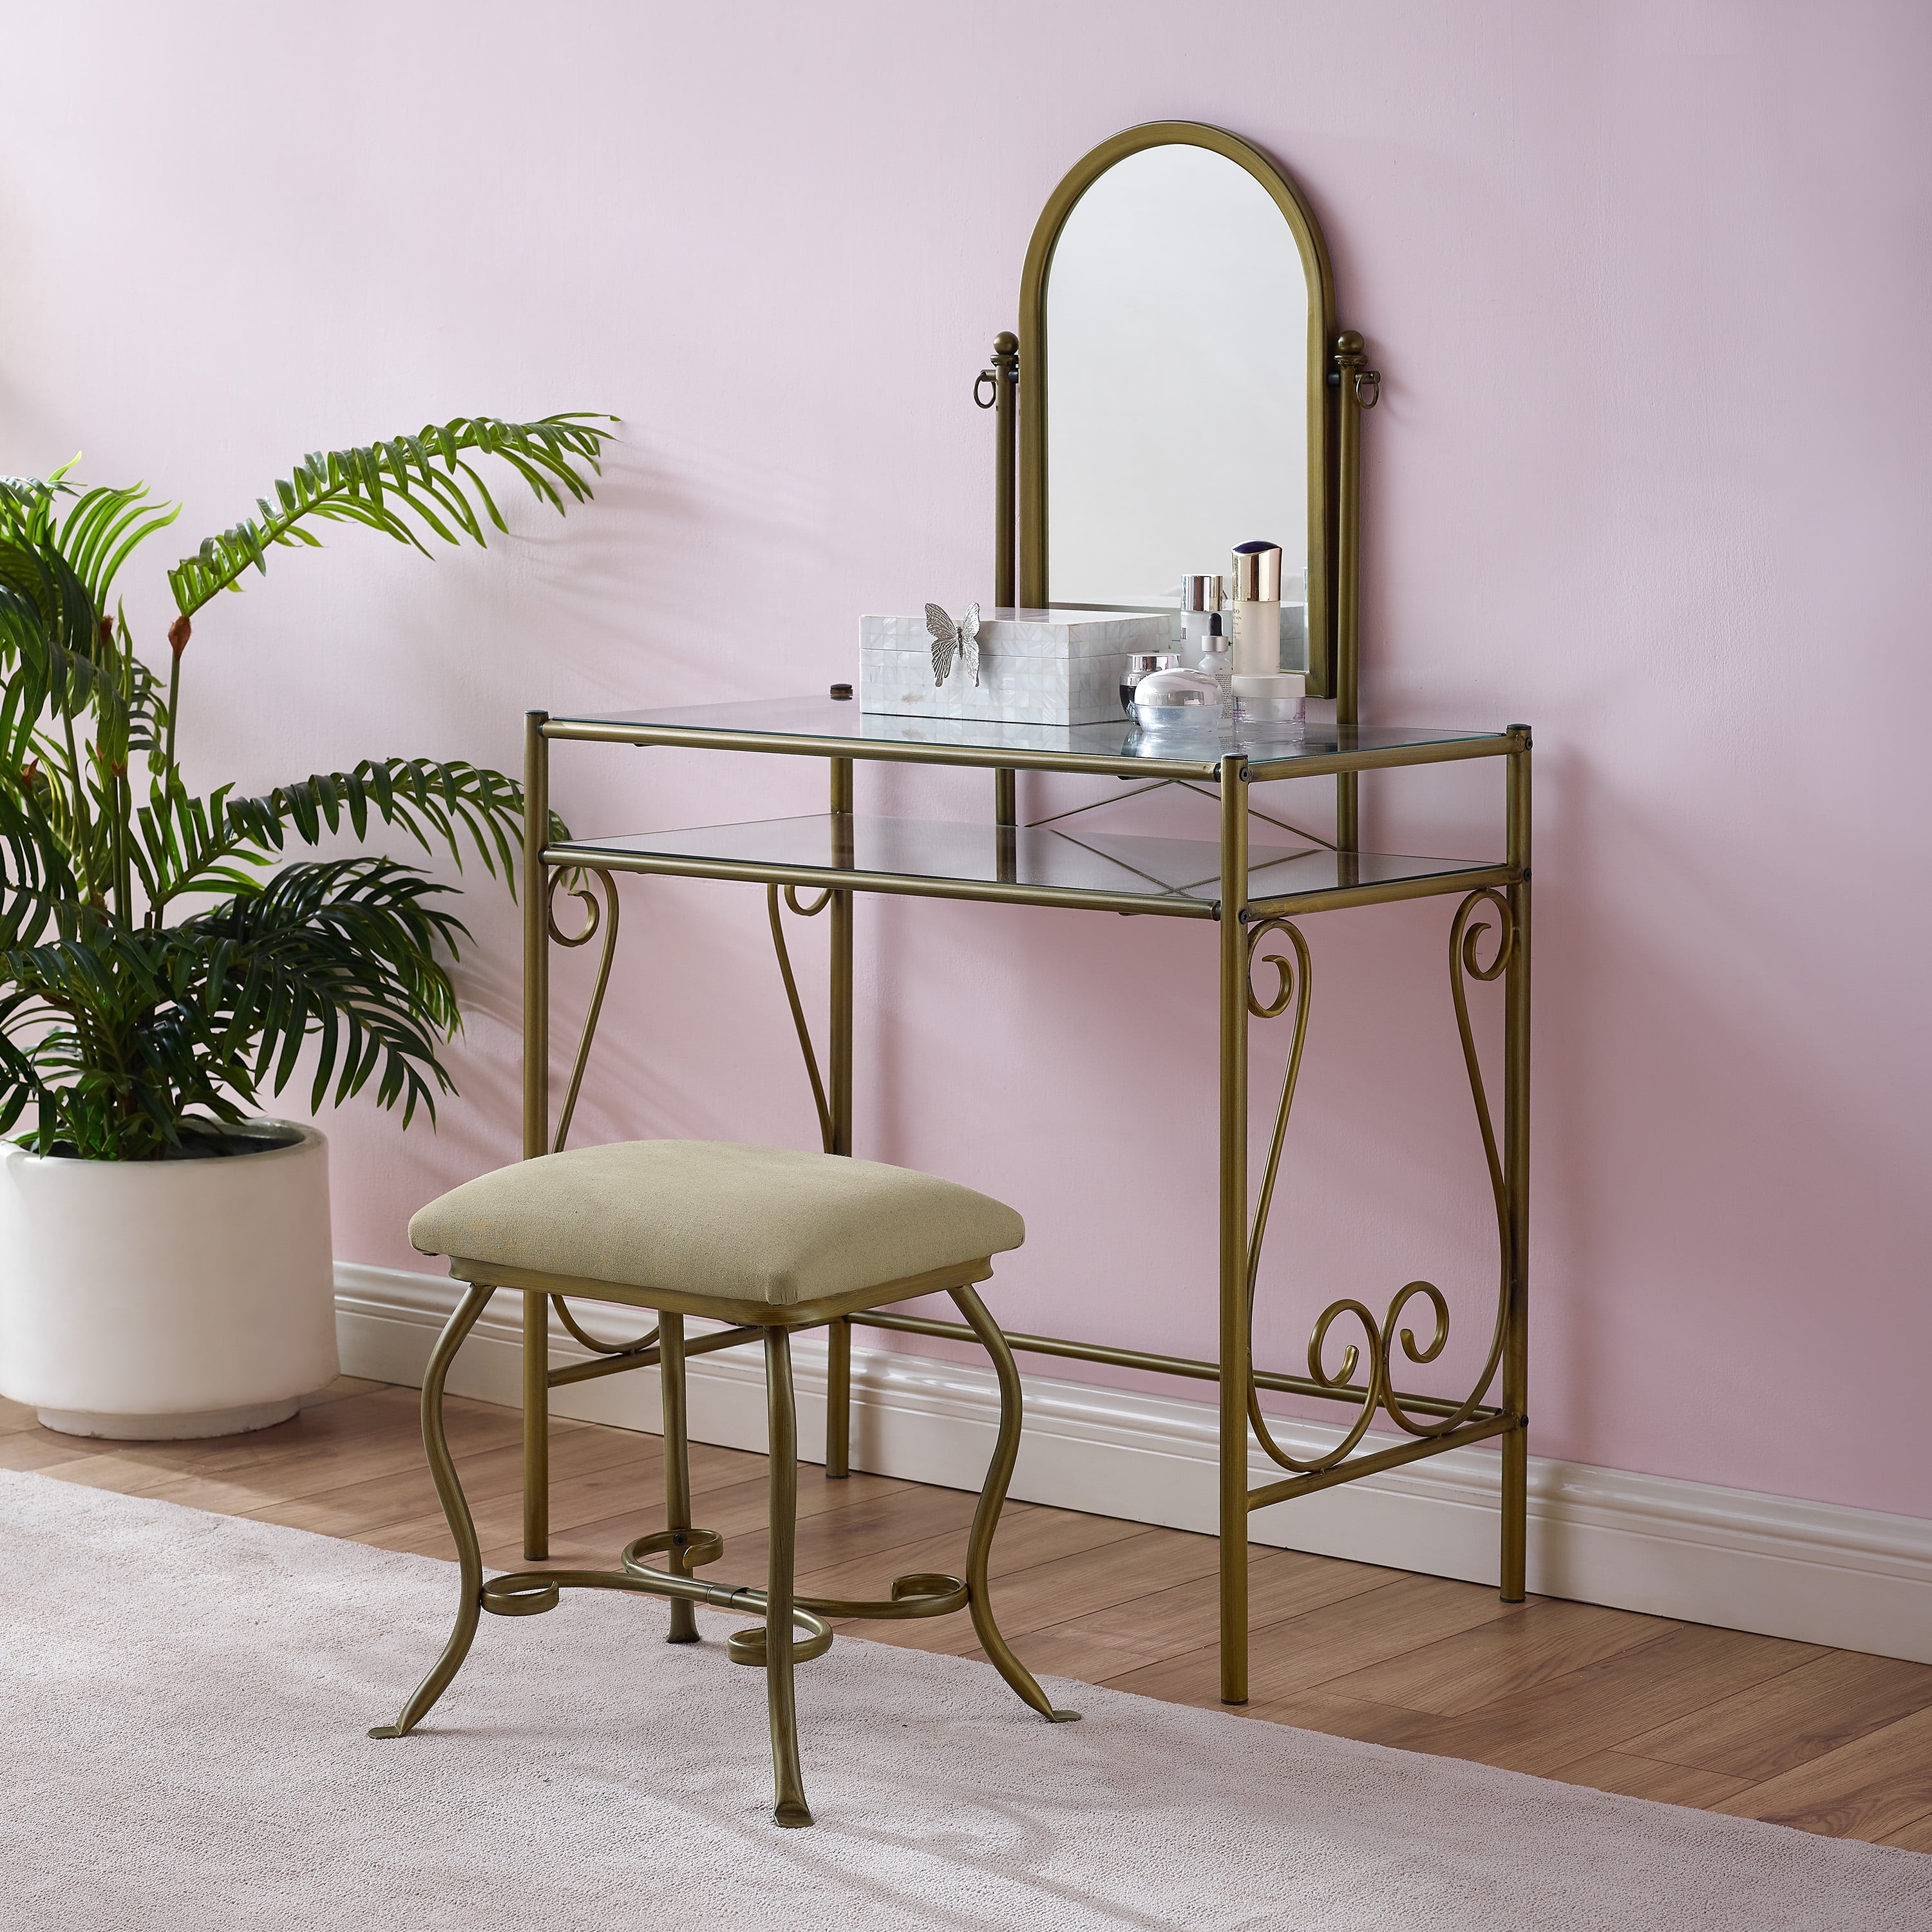 Linon Clarisse Vanity And Bench Stool, Gold Mirrored Vanity Bench